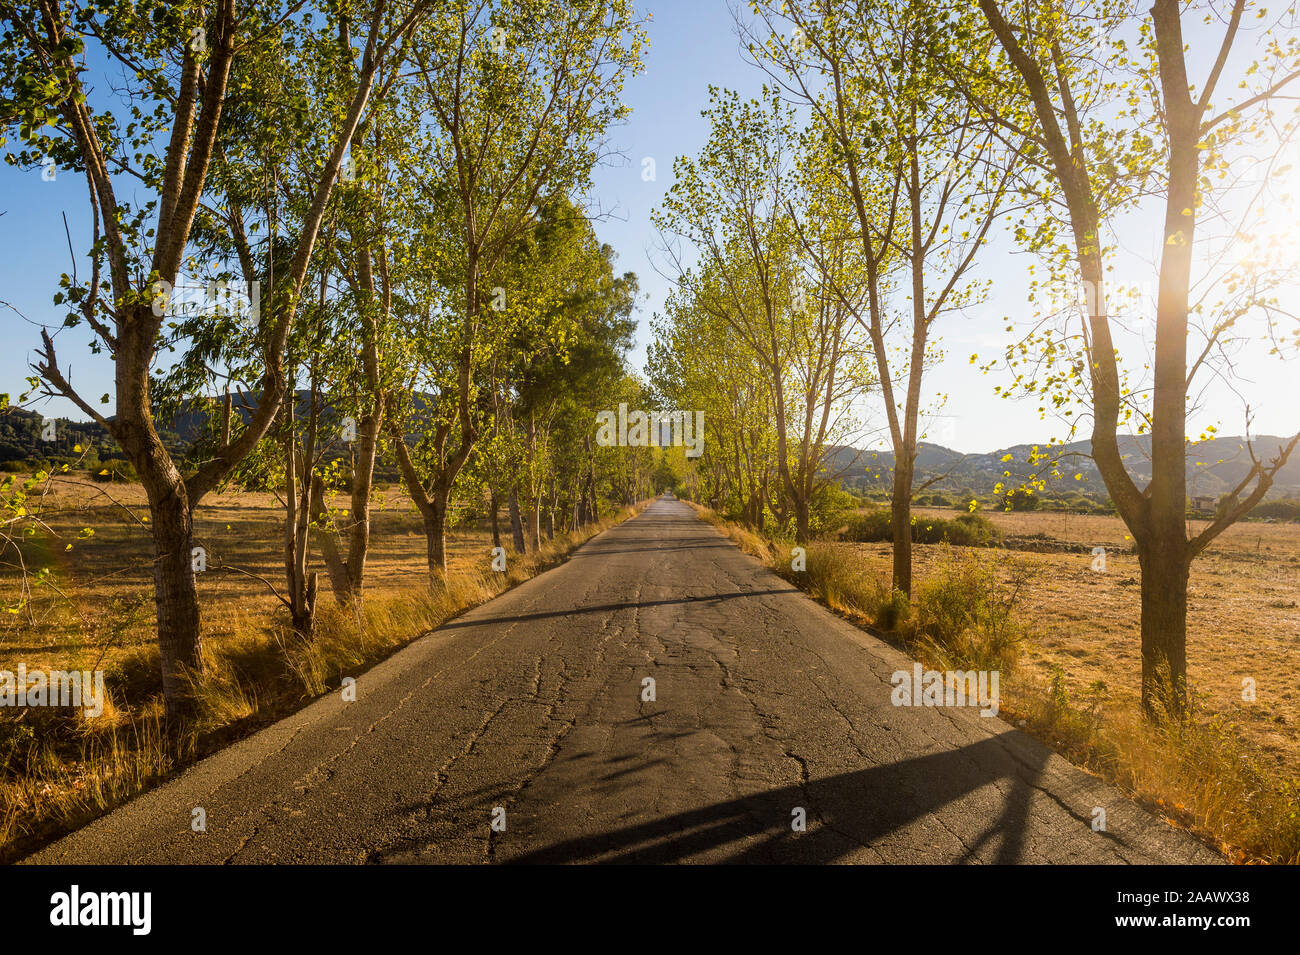 Diminishing perspective of empty road amidst trees during sunny day, Corfu, Ionian Islands, Greece Stock Photo